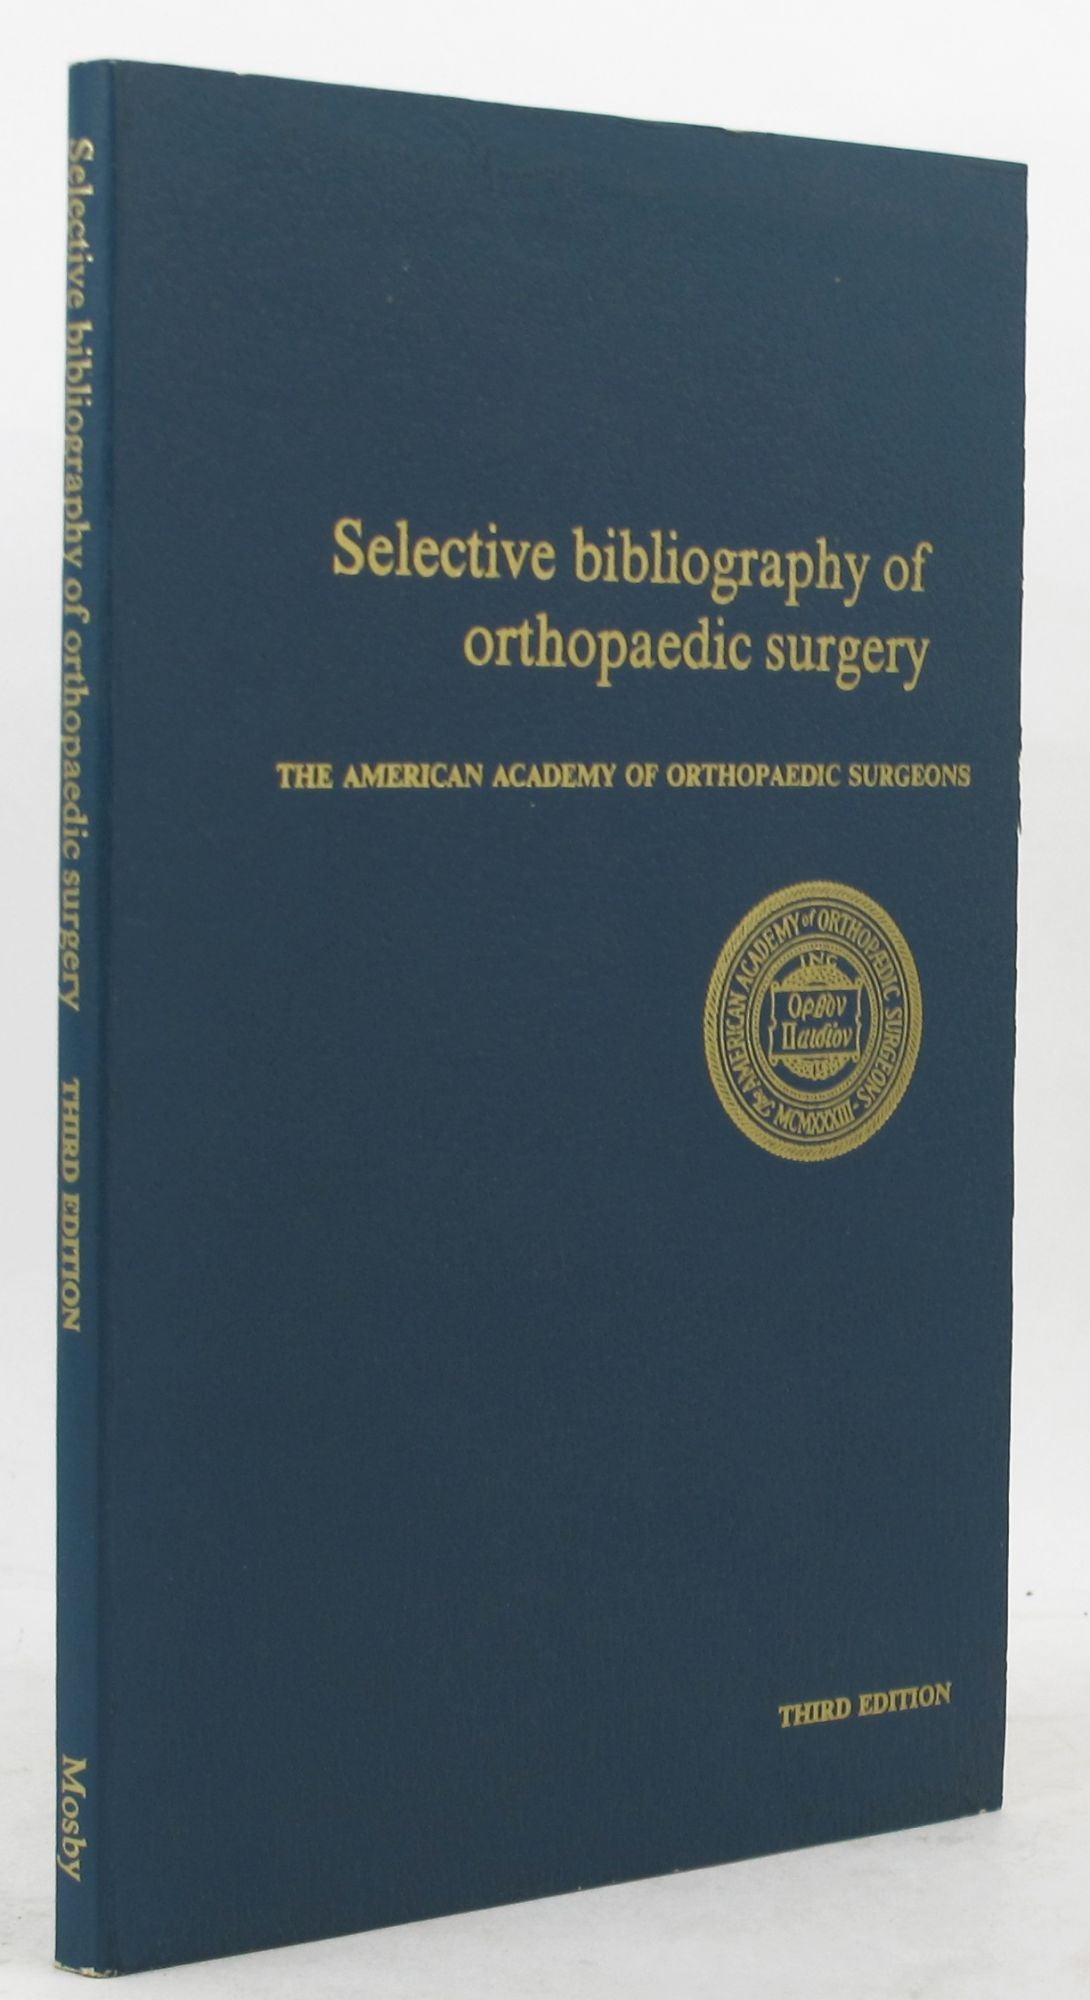 SELECTIVE BIBLIOGRAPHY OF ORTHOPAEDIC SURGERY | The American Academy of ...